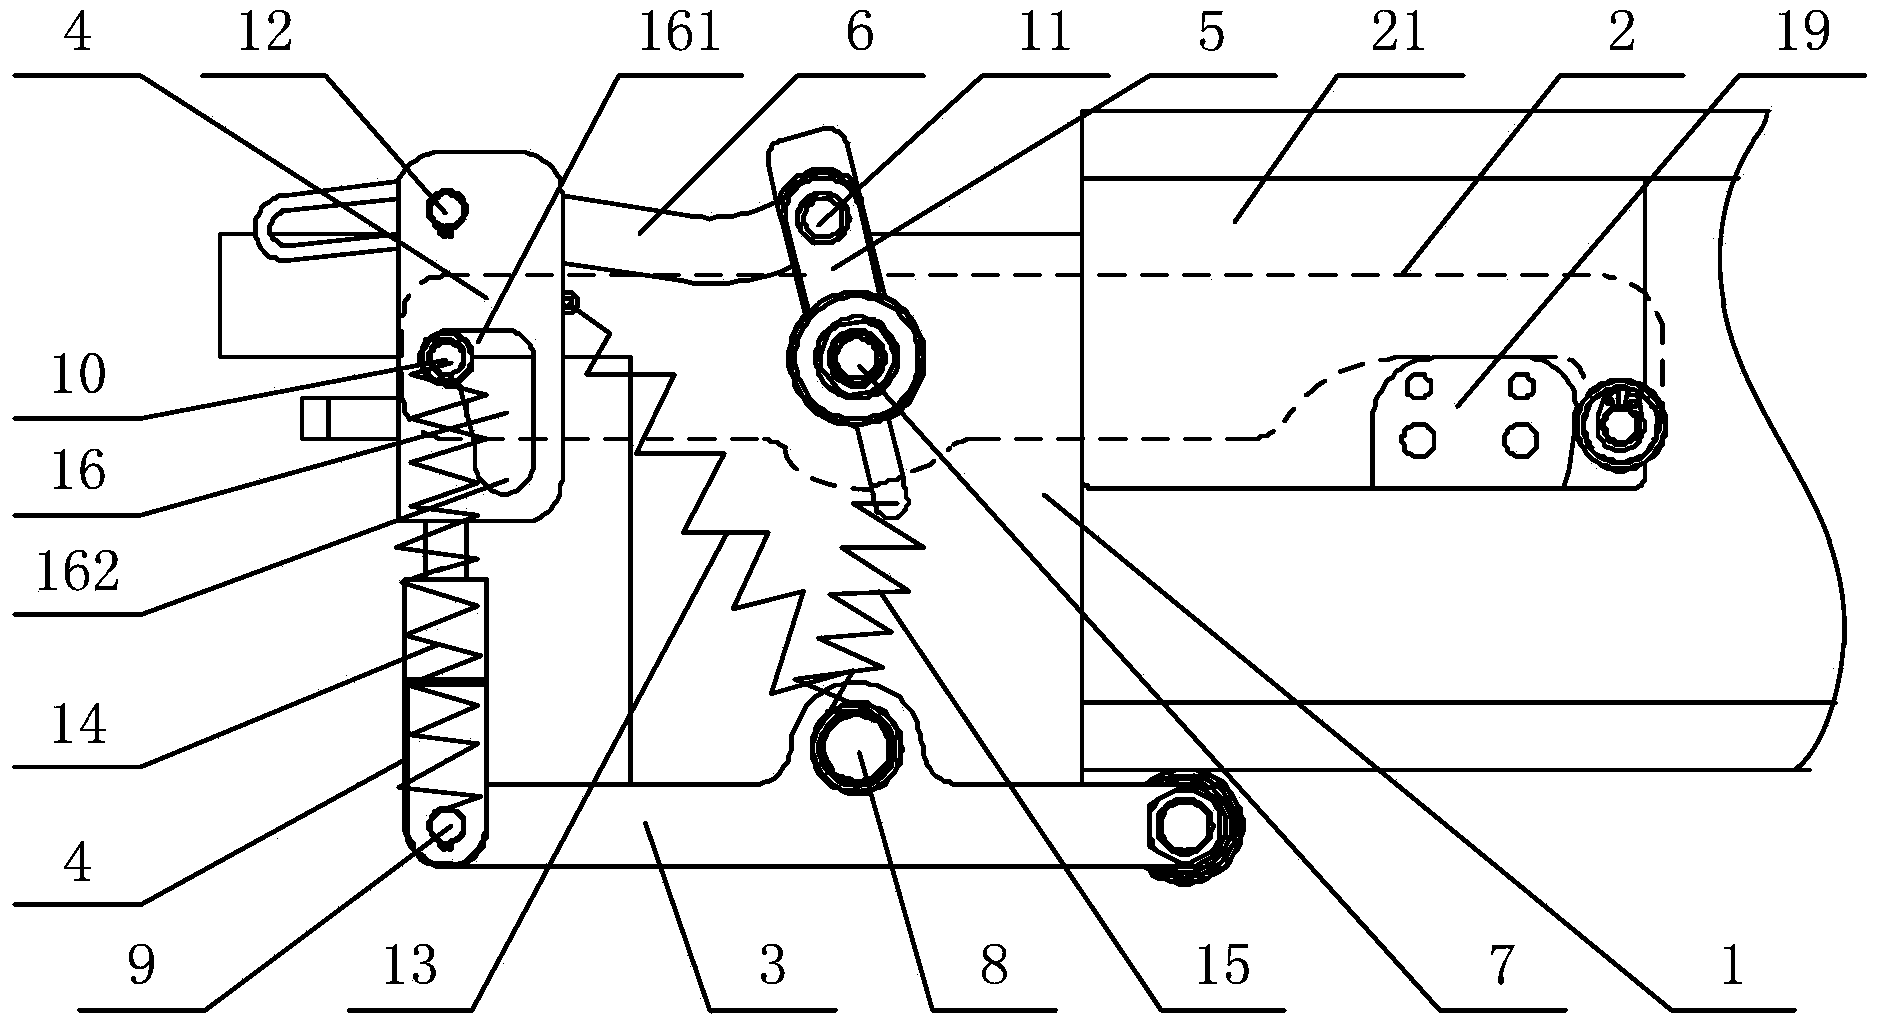 Son-mother trolley doffer six-connecting-rod guiding track abutting connection self-locking mechanism